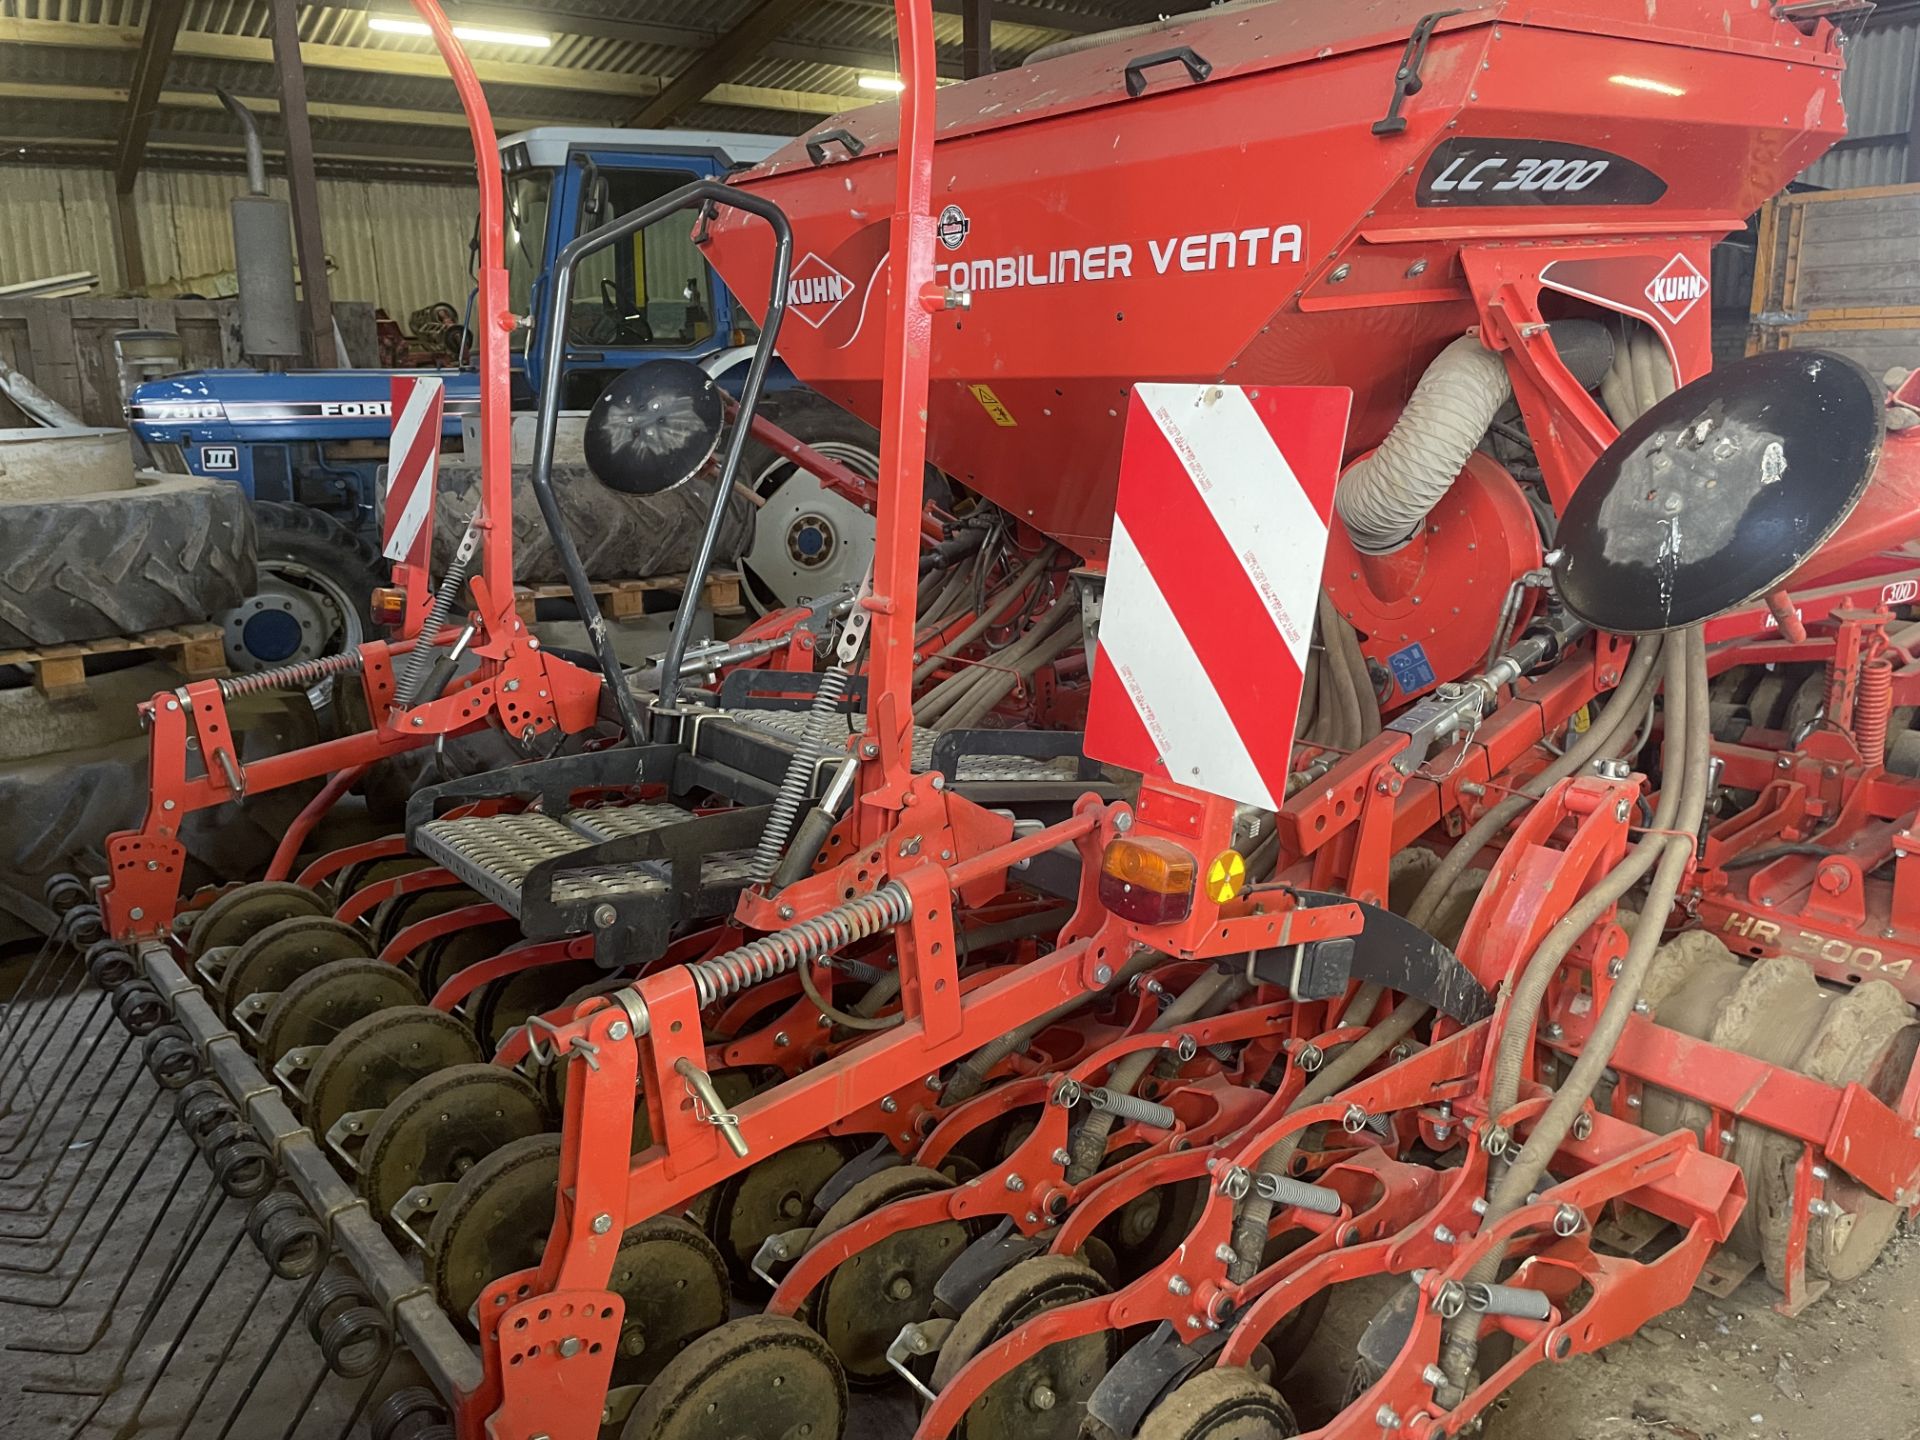 (15) Kuhn Combiliner Venta LC3000 3m power harrow combination drill, 2 rows of disc coulter, - Image 3 of 4